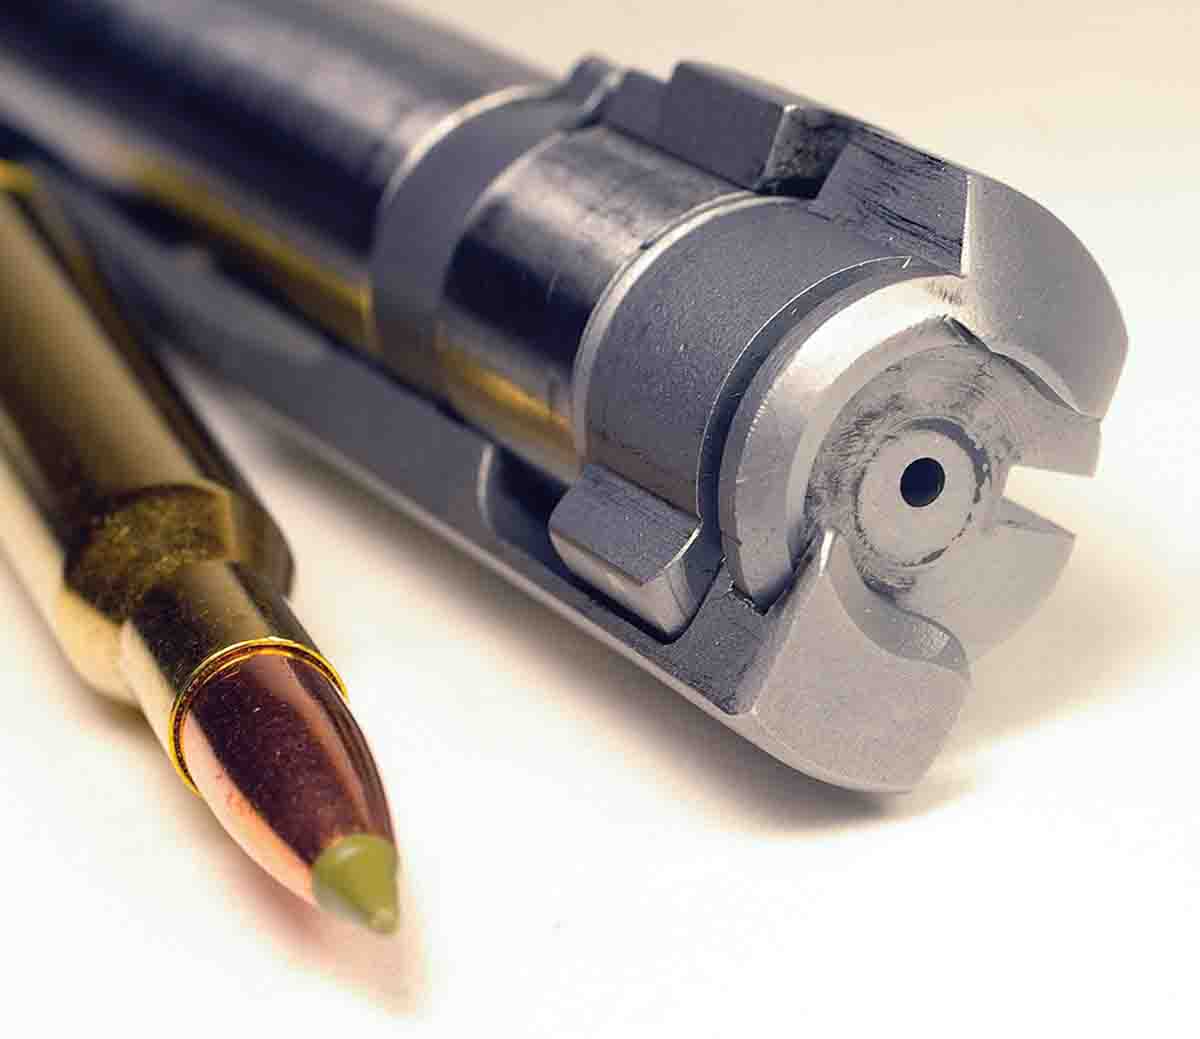 The 1999 action features a bolt that holds onto cartridges from the time they are stripped out of the magazine until the fired case is ejected. Cartridges must be snapped into the magazine for the extractor to grab them.